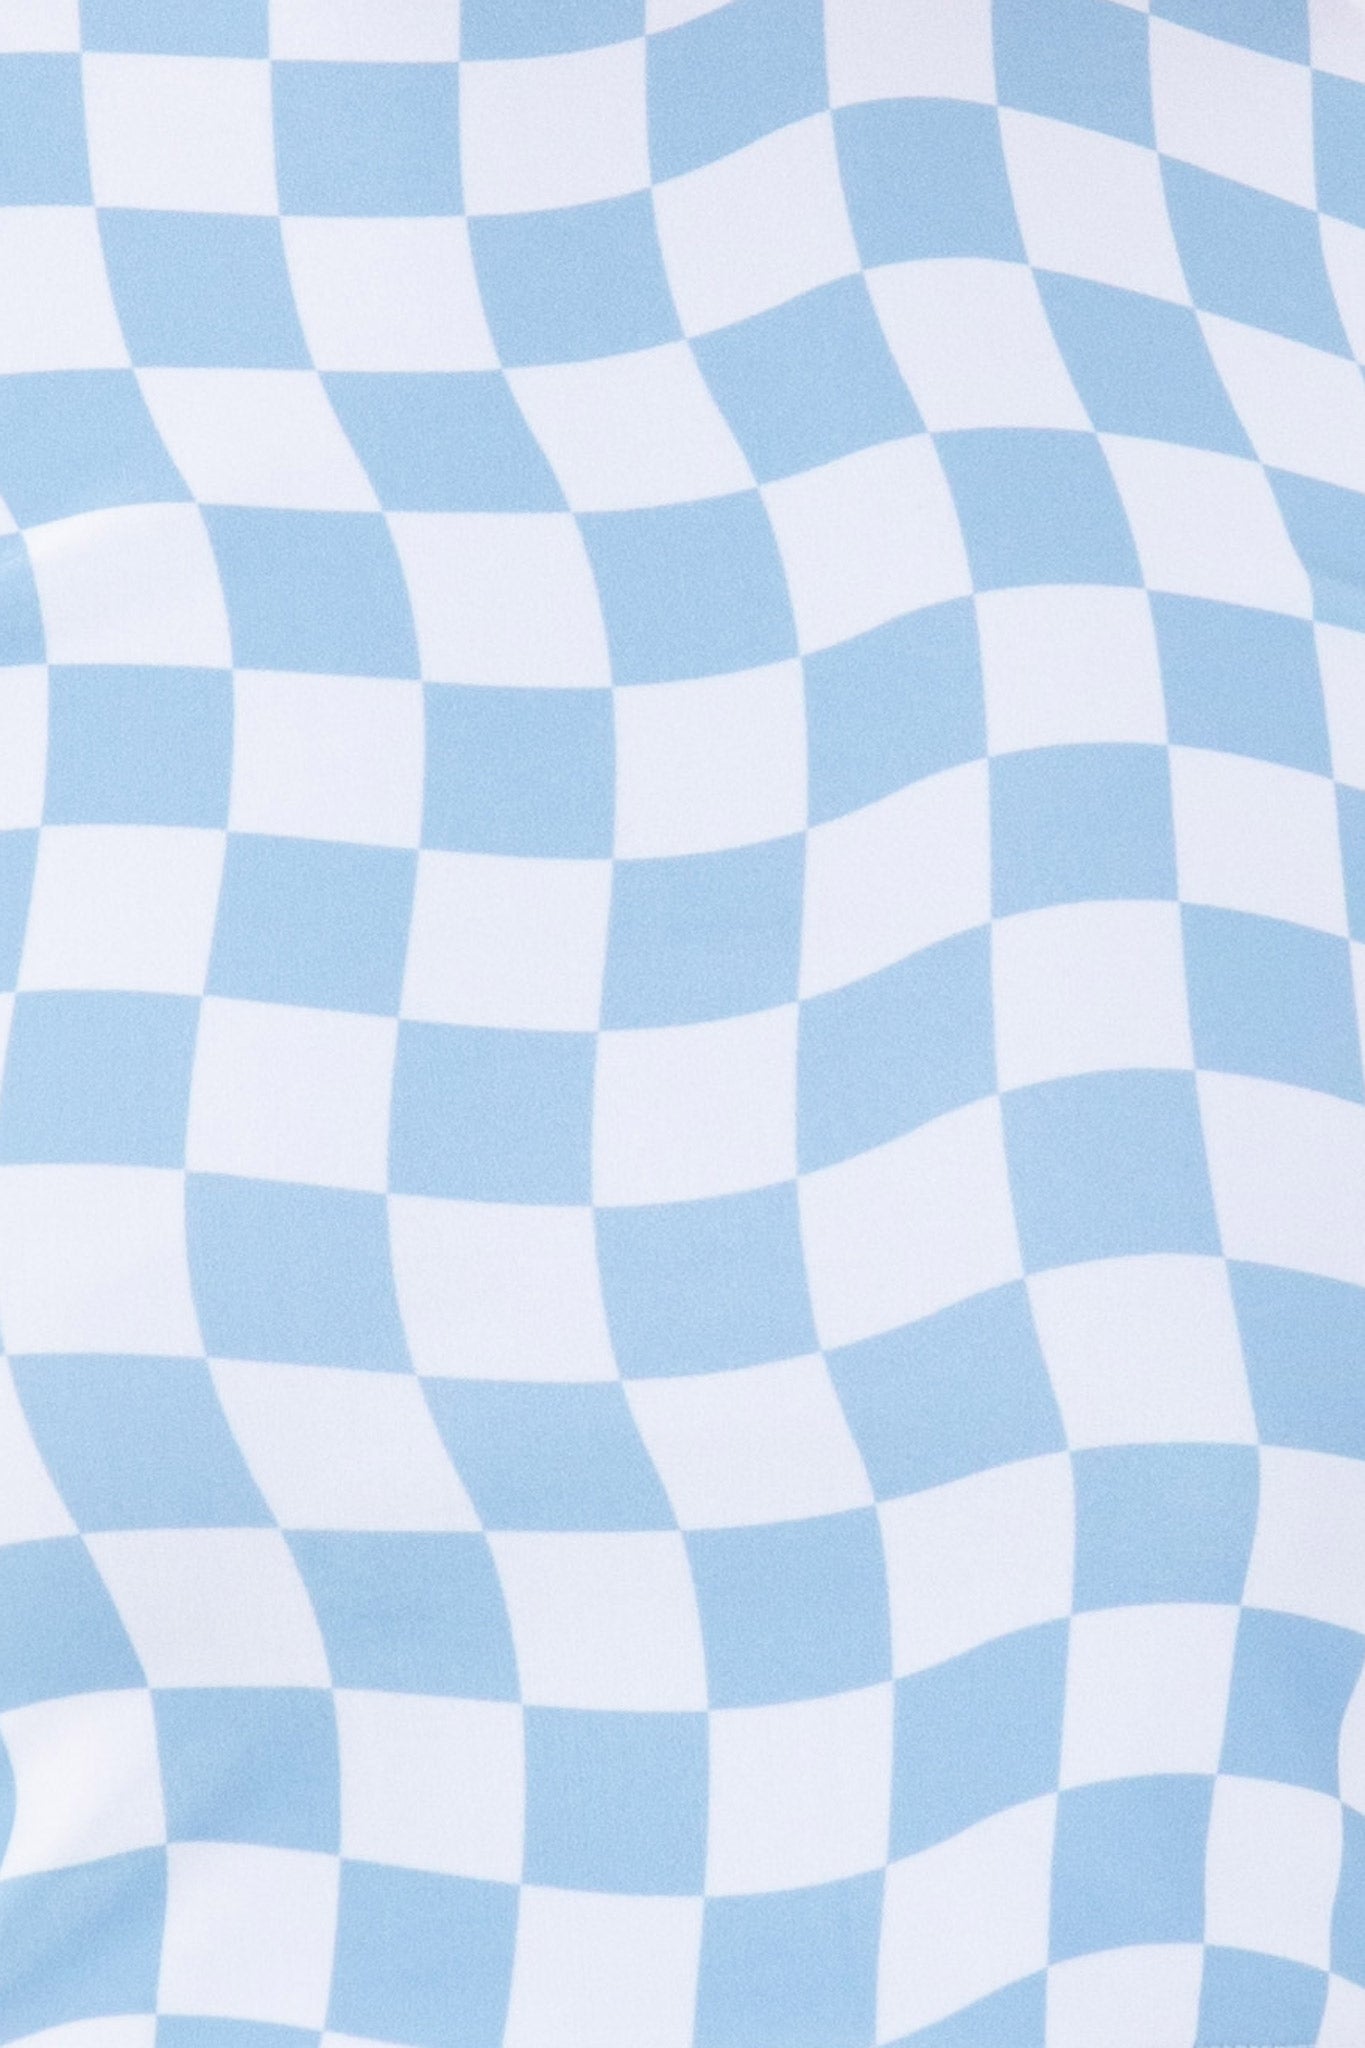 Close-up view of the Putu Surf Bikini Top showing its blue and white checkered design